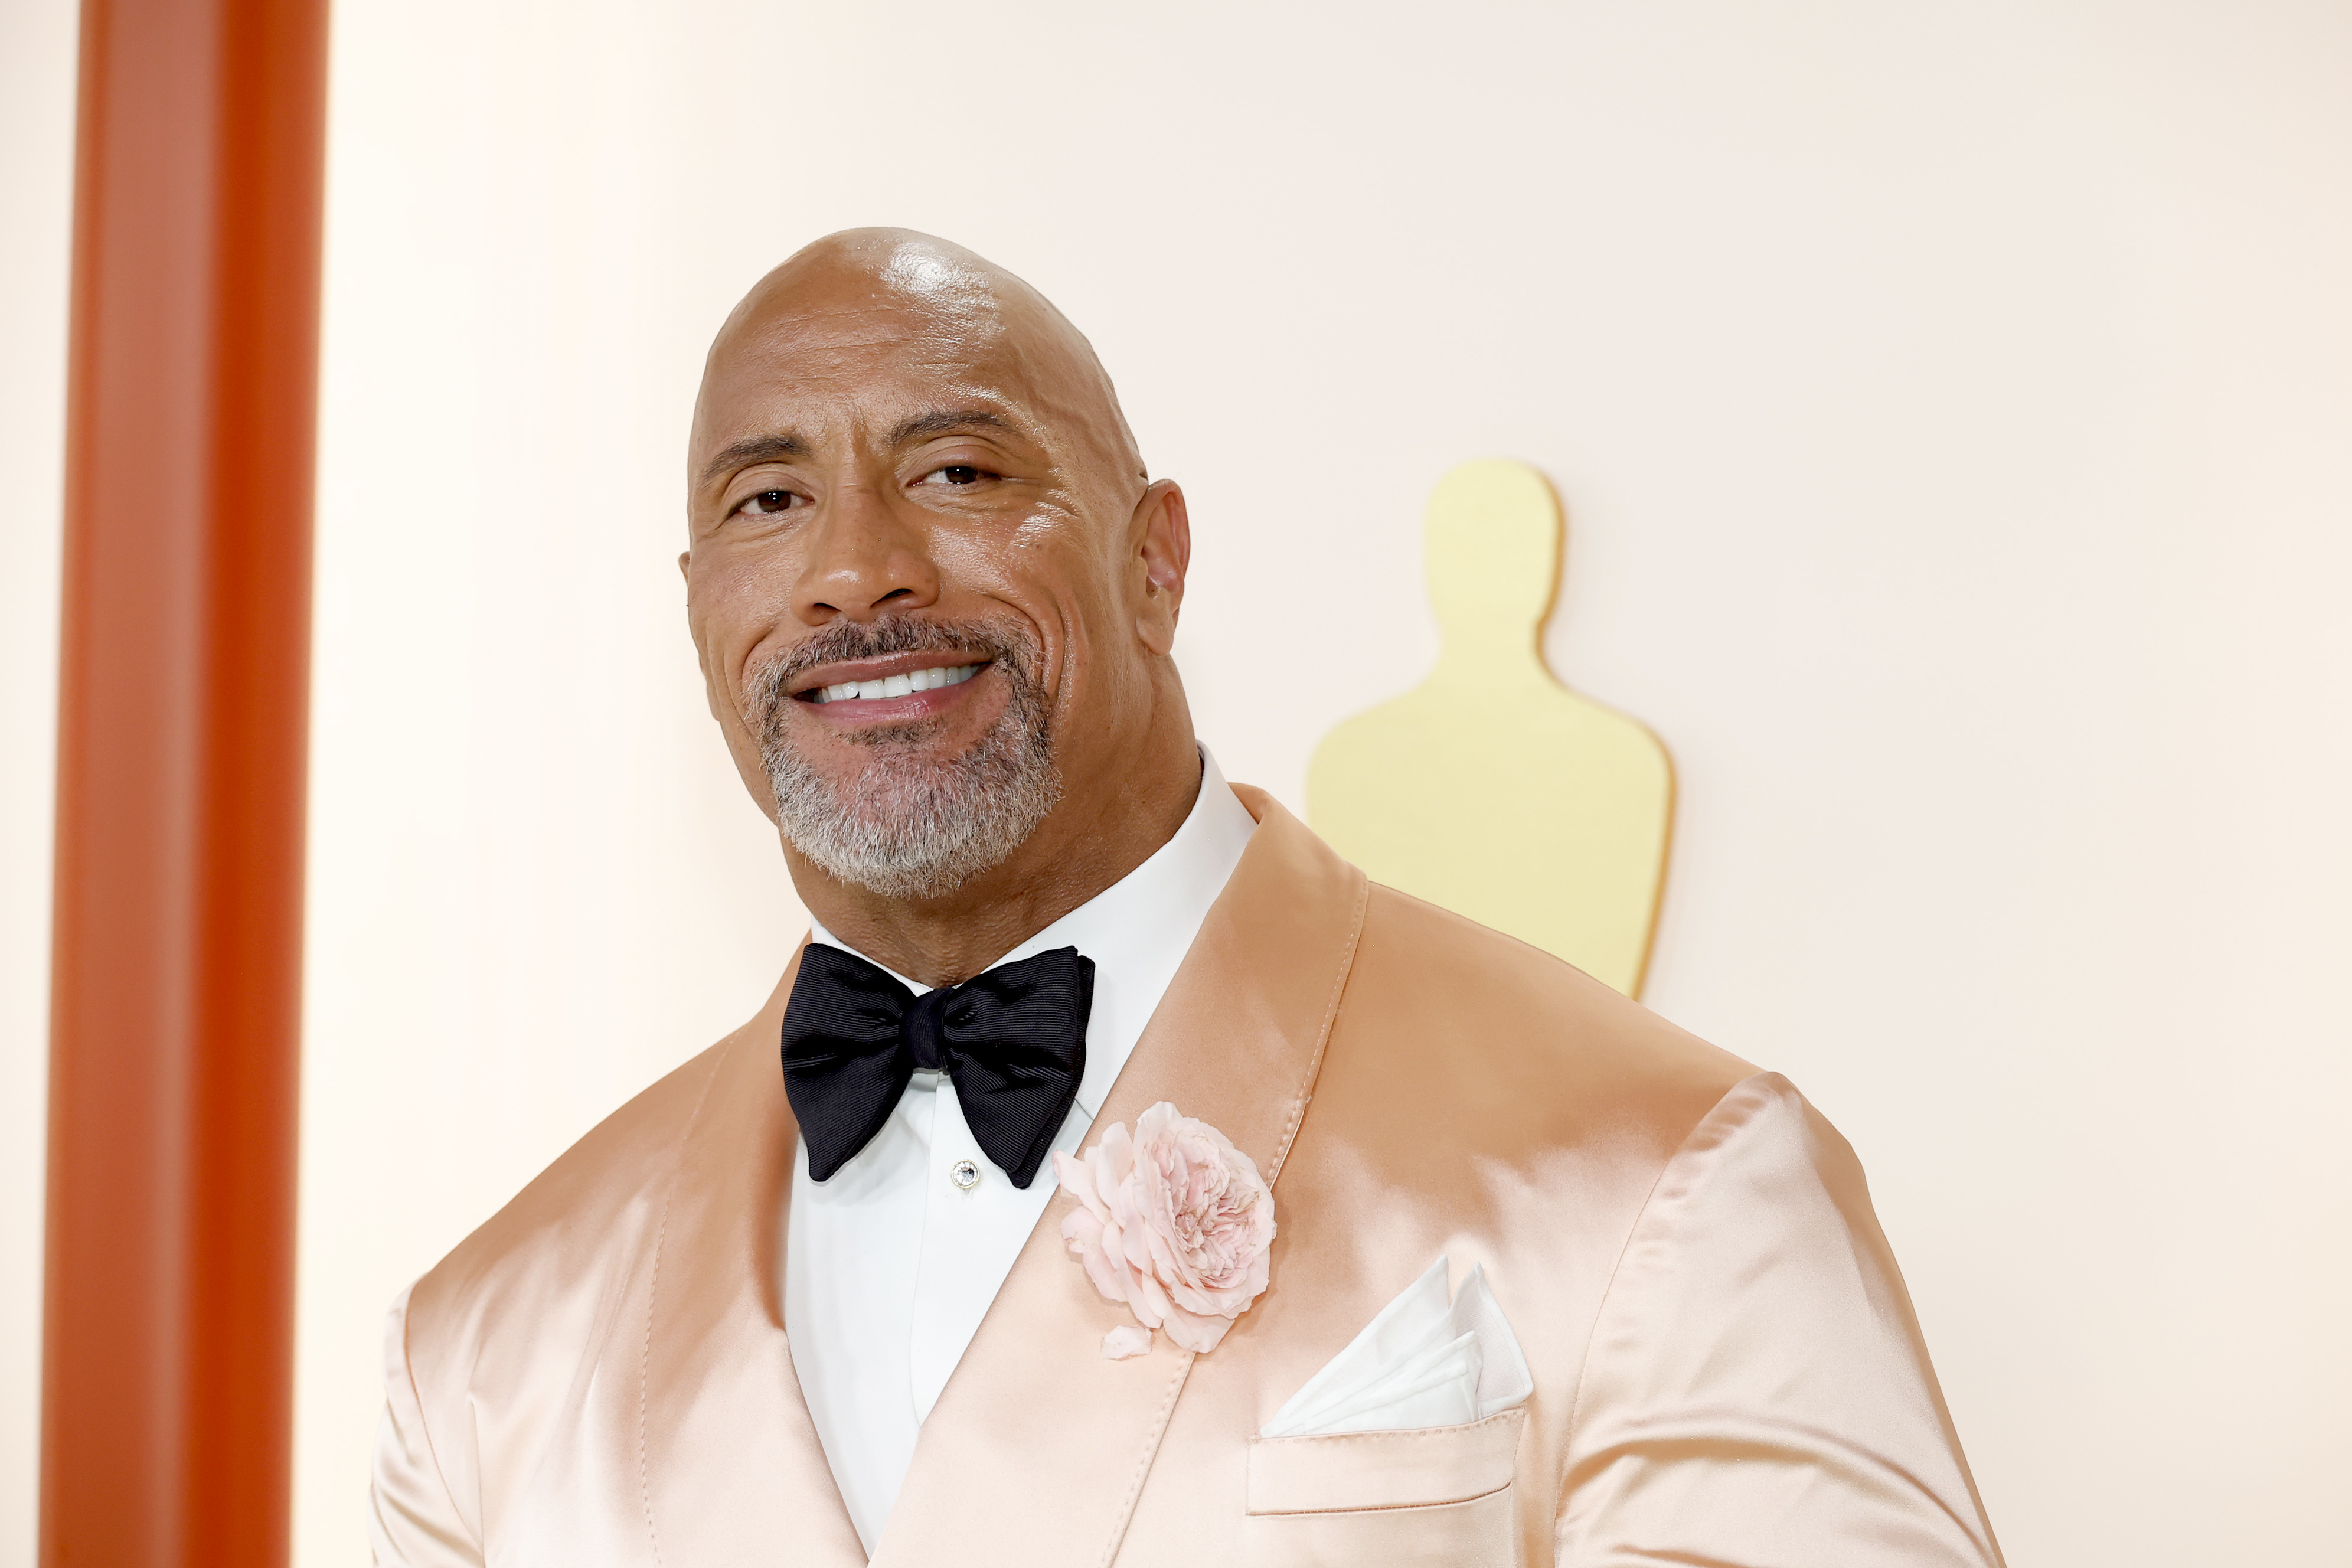 Dwayne Johnson in a bow tie at a media event